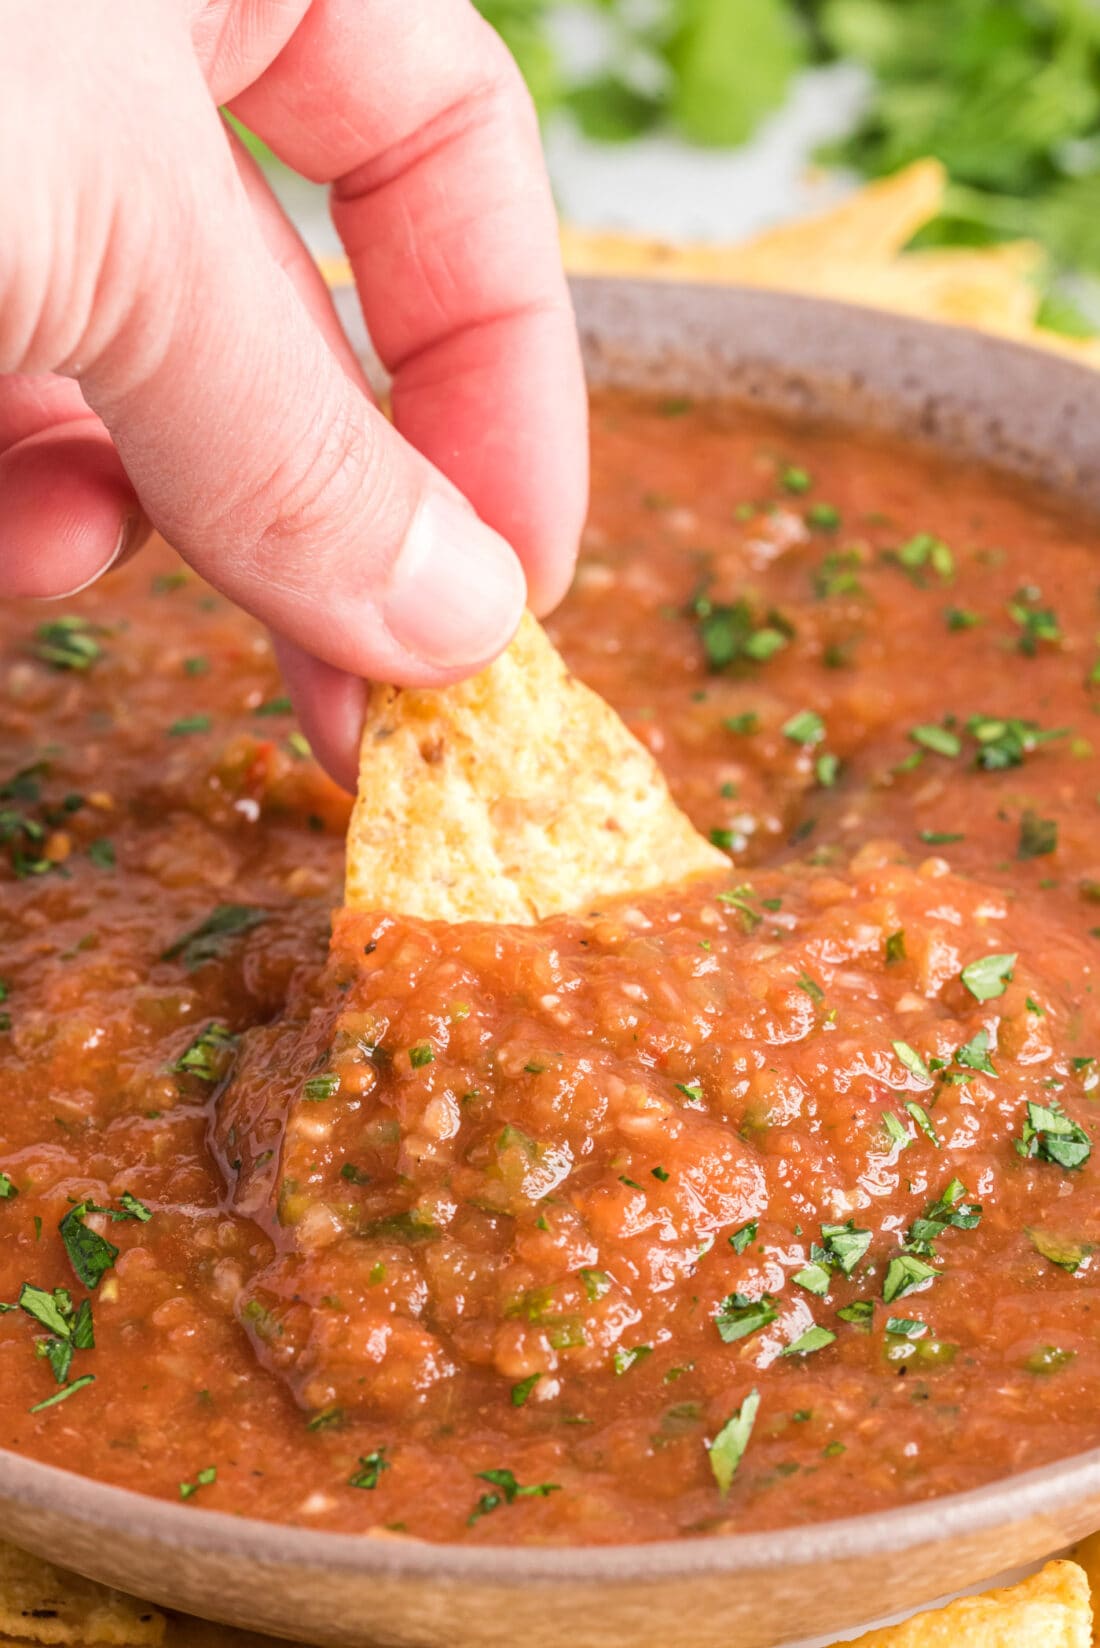 chip dipped into Restaurant Style Salsa